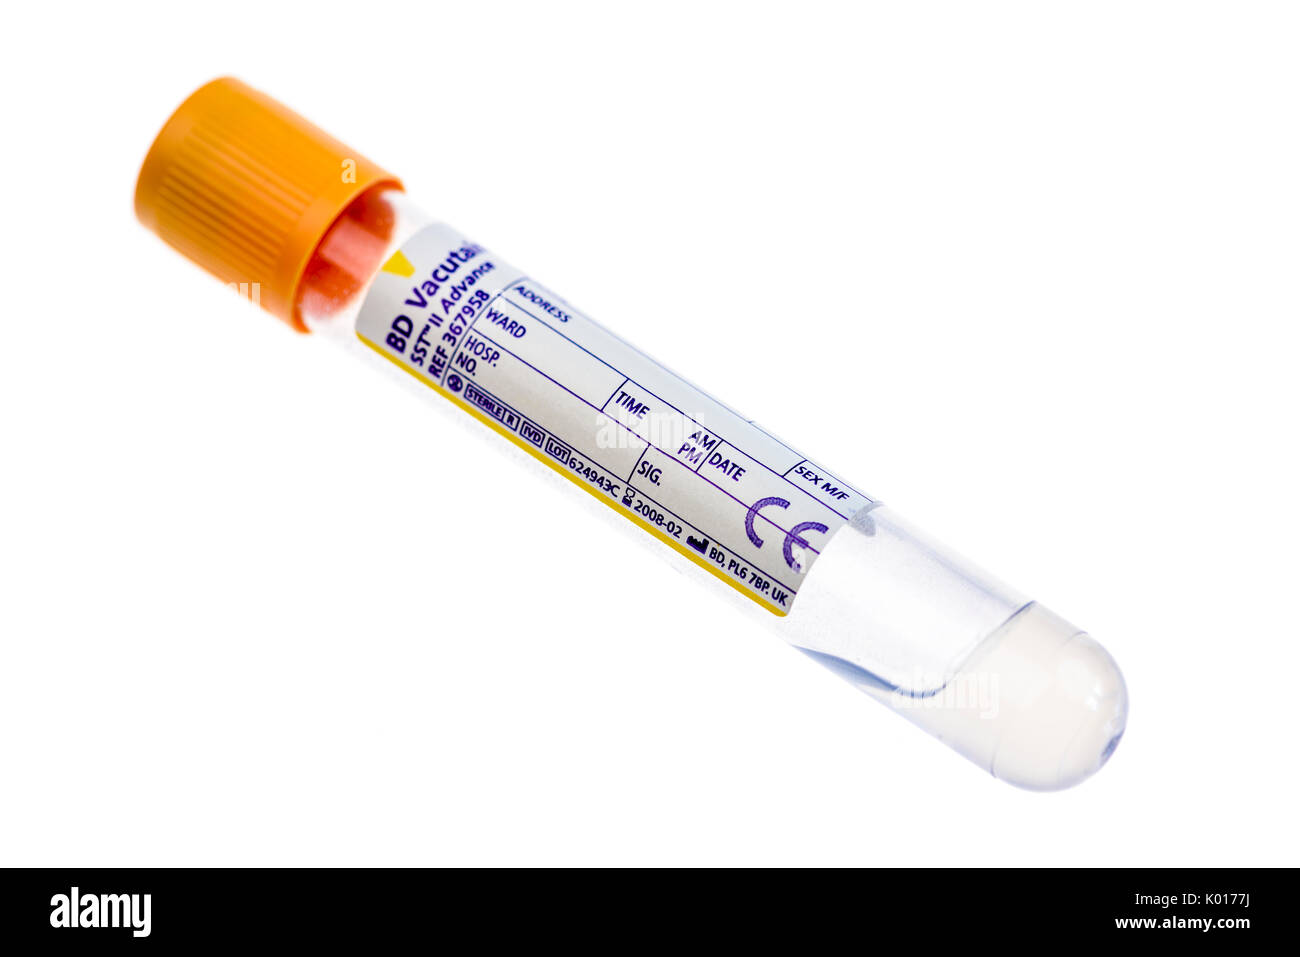 Yellow vacutainer for collecting bloods for biochemistry (urea, electrolytes, liver function, kidney function etc). Stock Photo